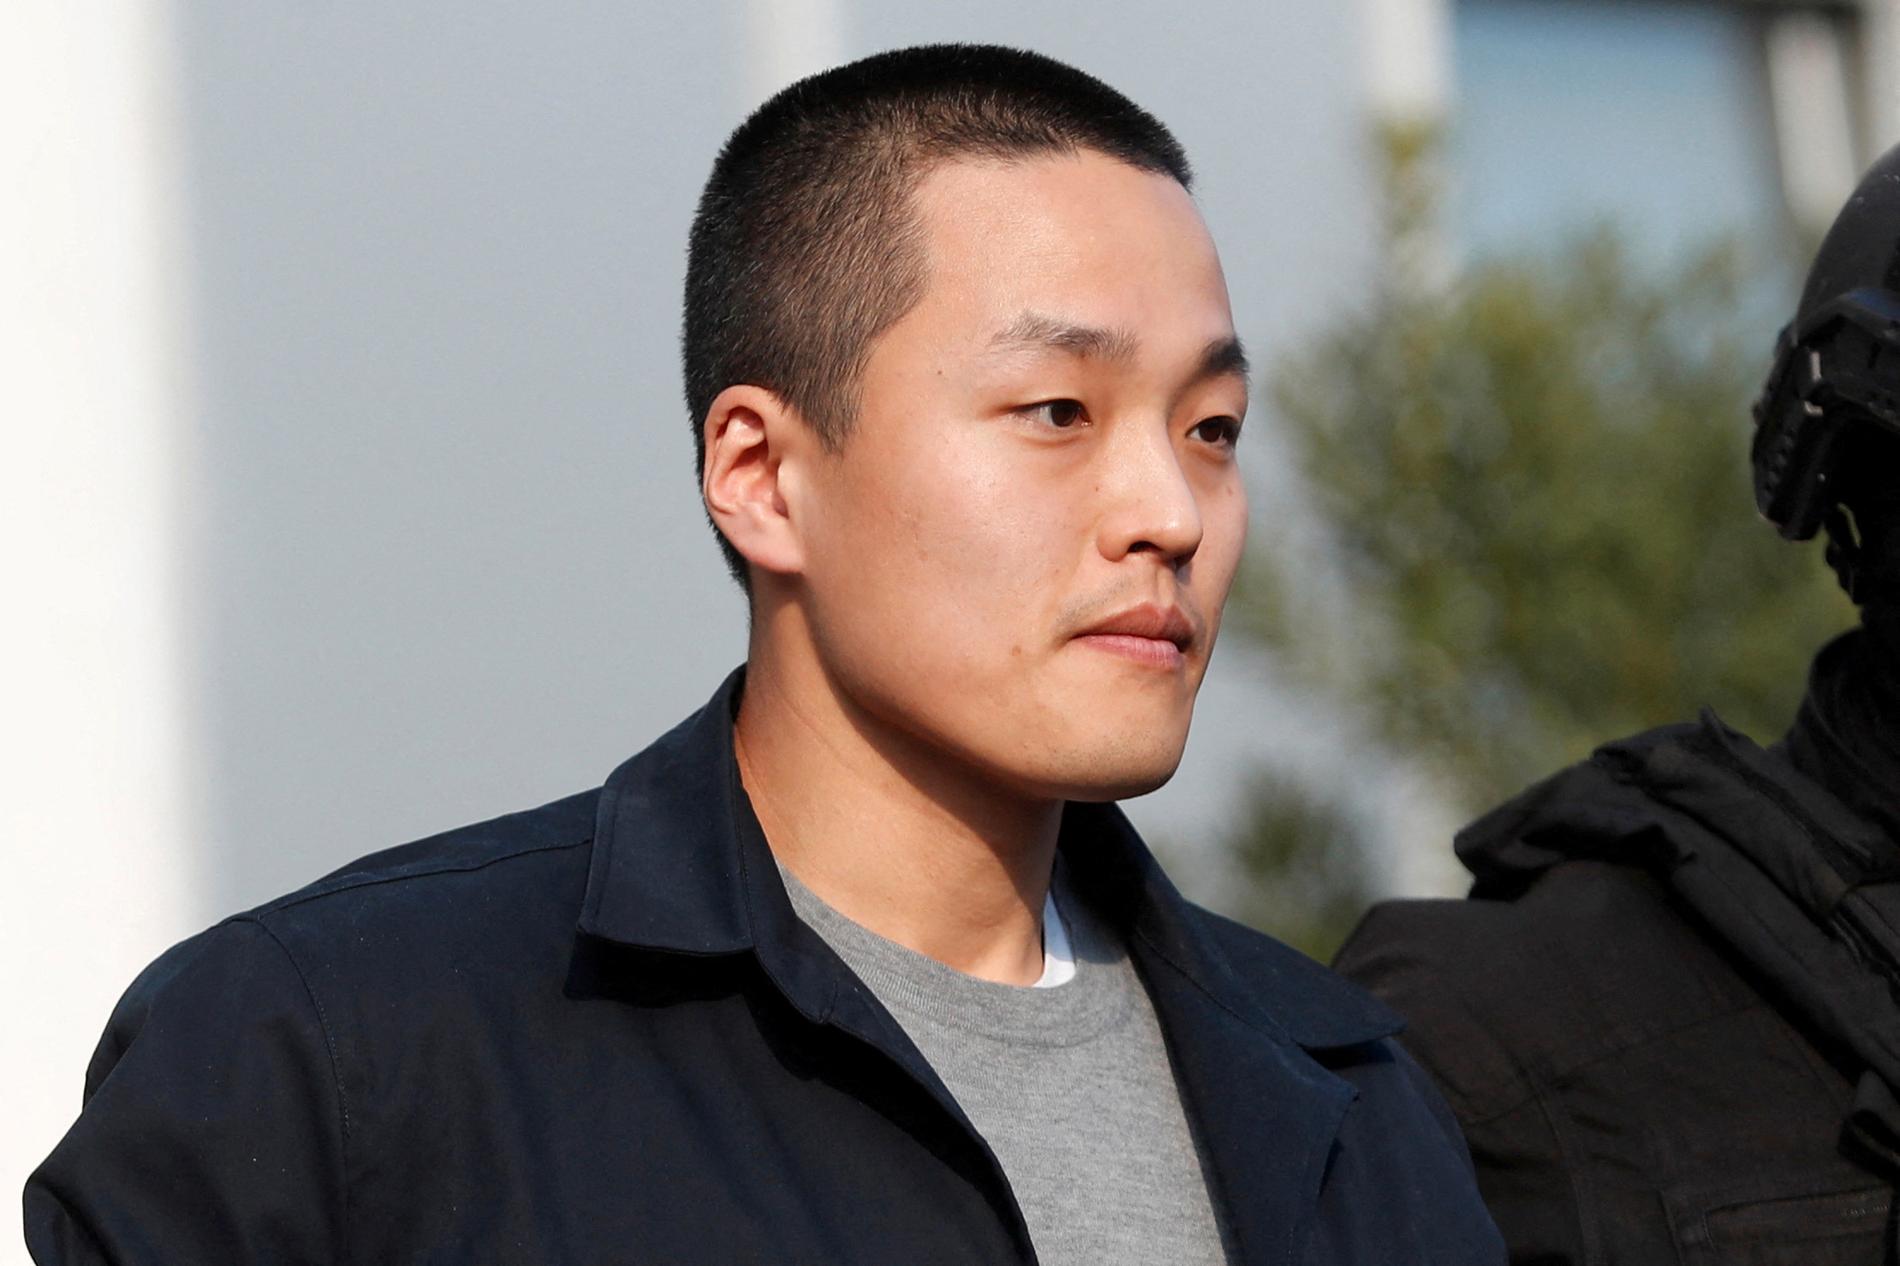 The Collapse of TerraUSD: Do Kwon Found Guilty of Fraud in Civil Case